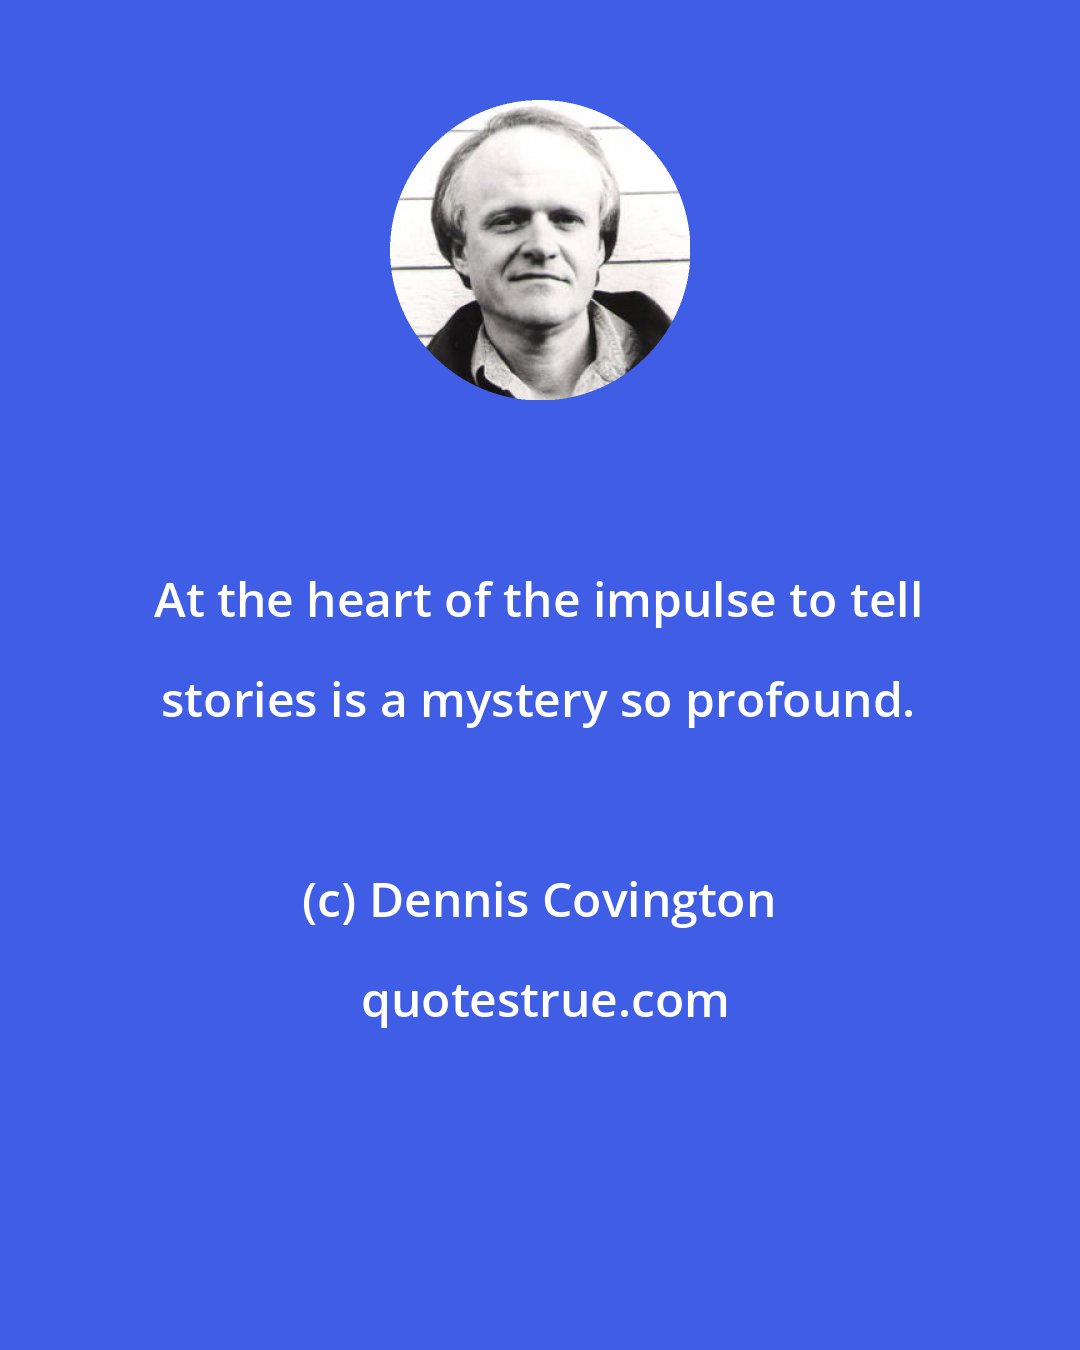 Dennis Covington: At the heart of the impulse to tell stories is a mystery so profound.